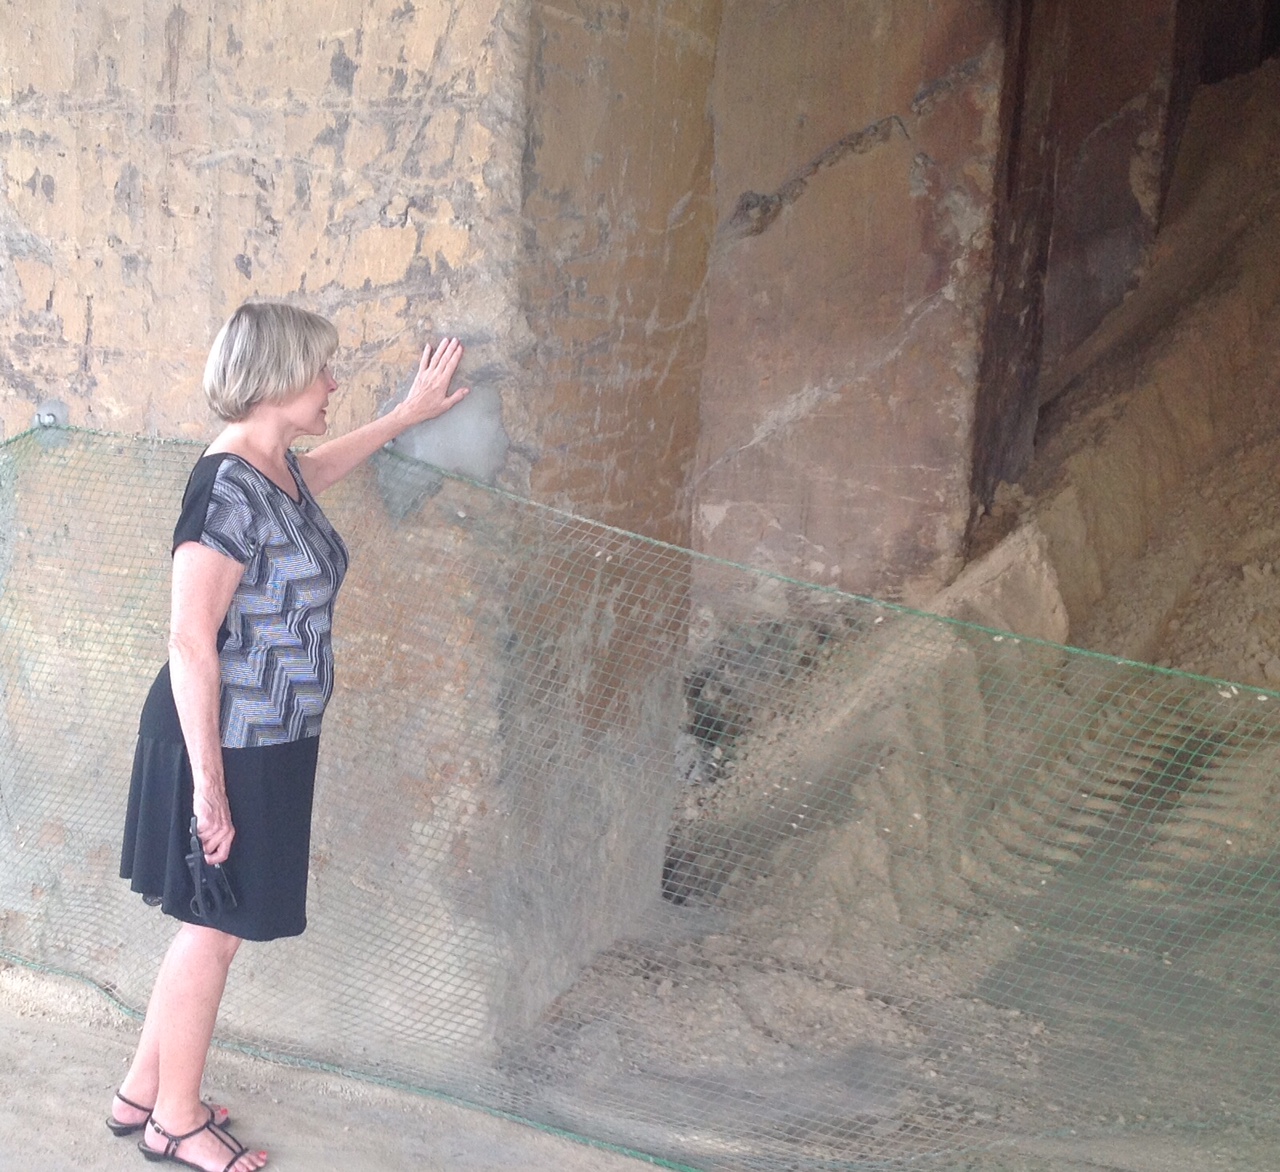 Kathy Holcomb touching the wall of one of the original buildings at the Ishihara Sangyo plant where her father labored as a POW in World War II (Kirk Spitzer)